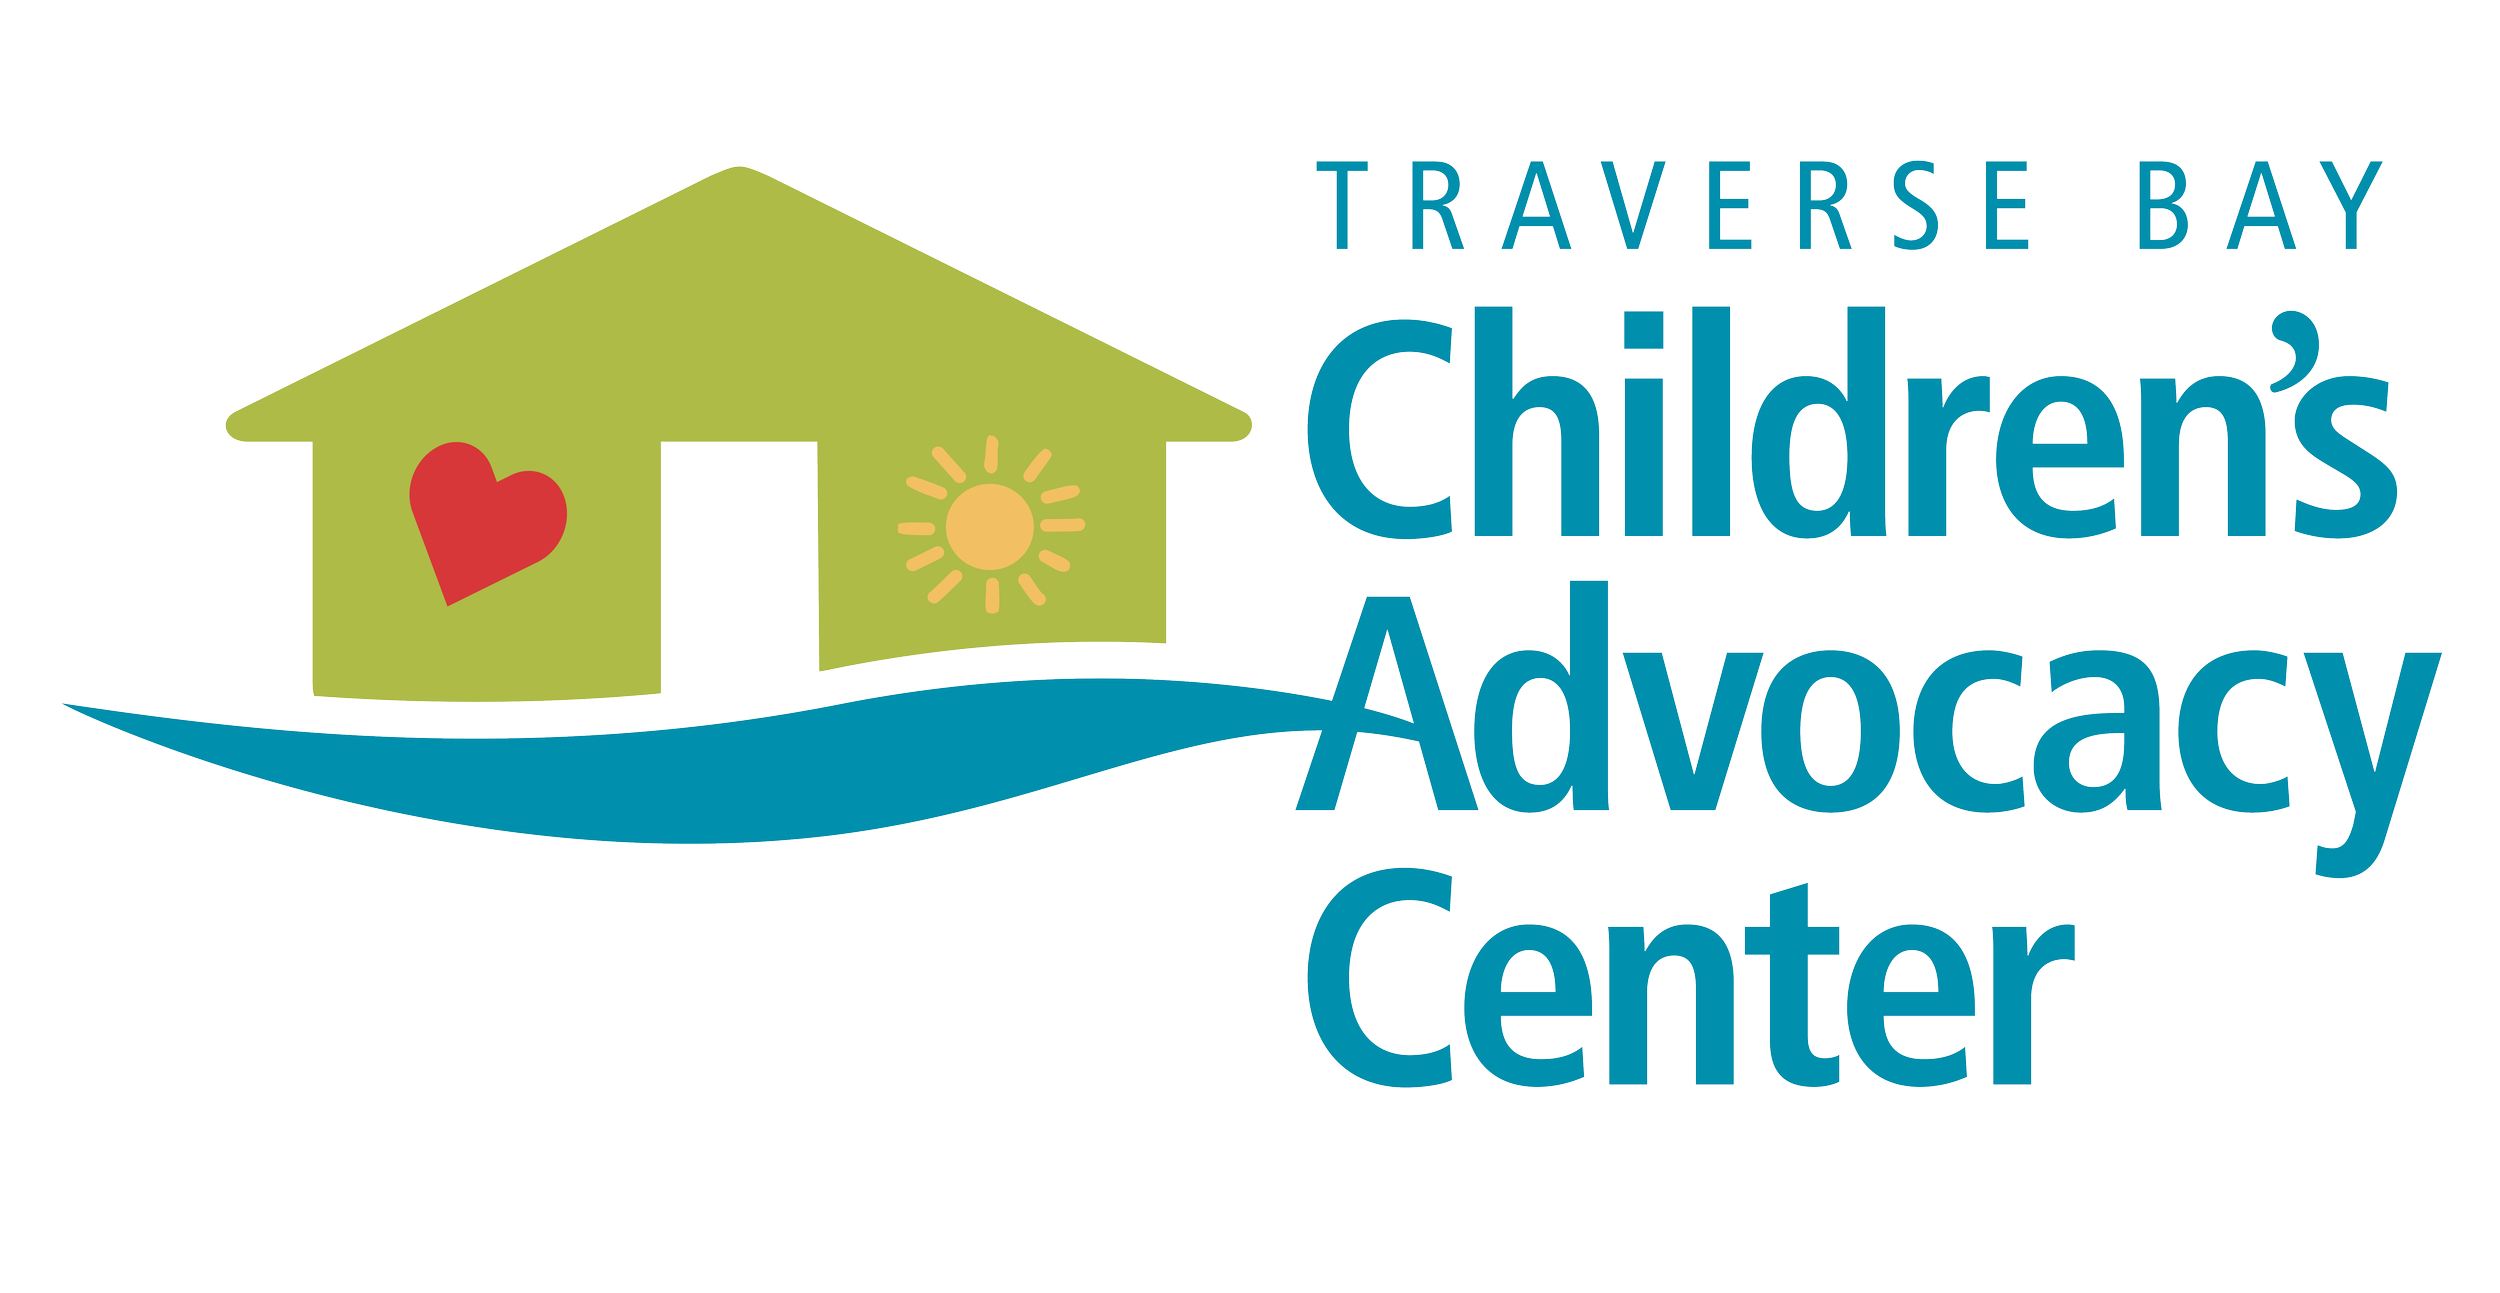 The logo of Wand North's client; Traverse Bay Children's Advocacy Center.